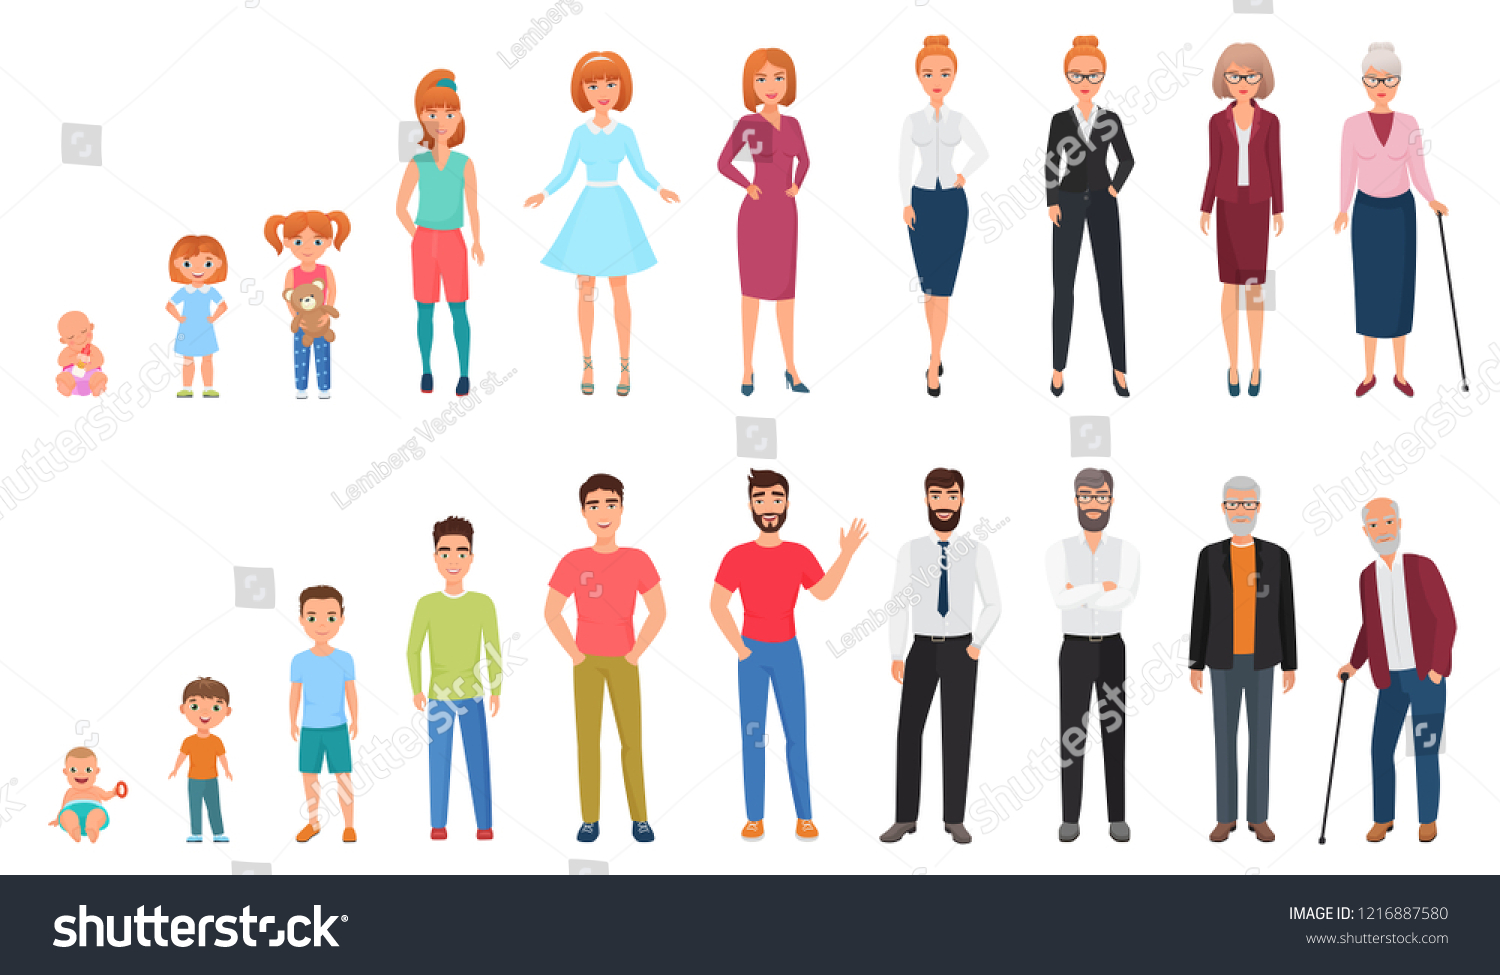 Life Cycles Man Woman Tiny People Stock Vector (Royalty Free ...